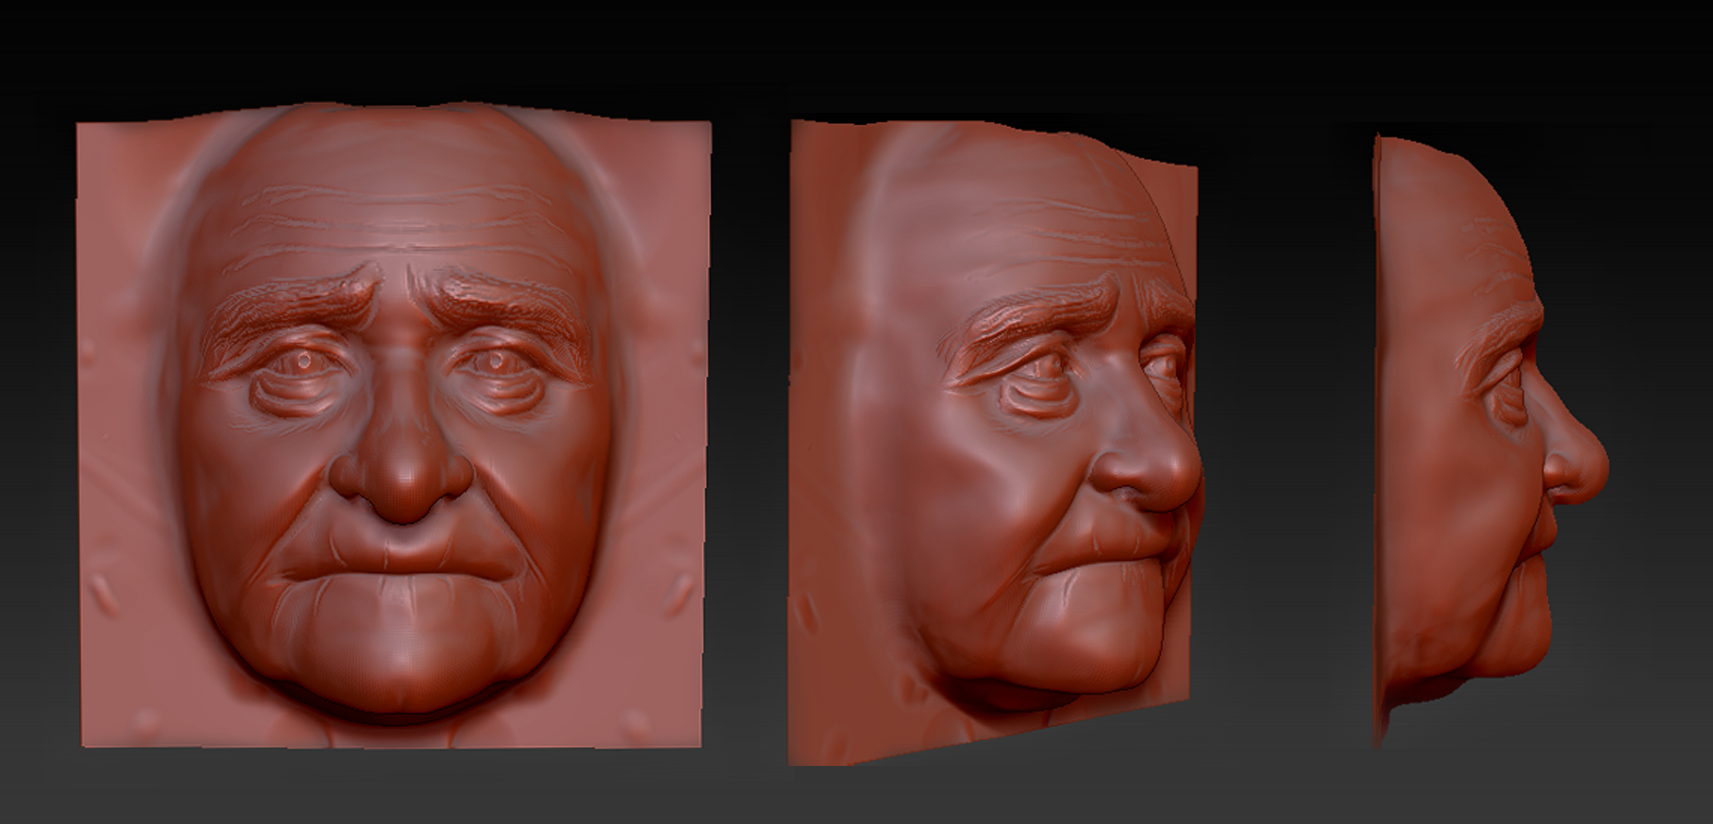 learning_zbrush___07_by_gingeradventures-d67xn4i.png